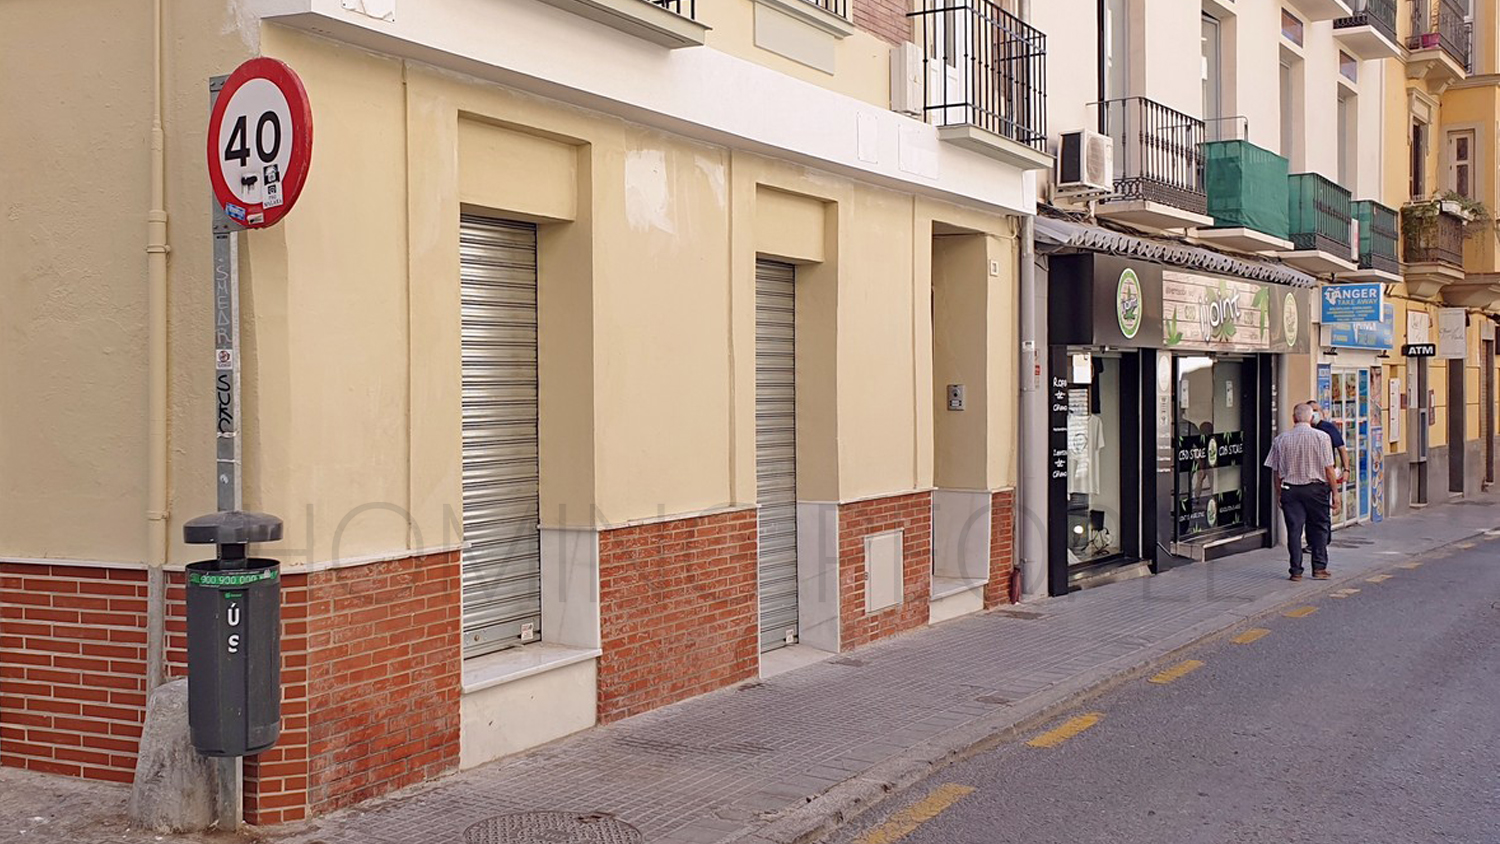 Retail space in the center of Malaga, two minutes' walk from Uncibay